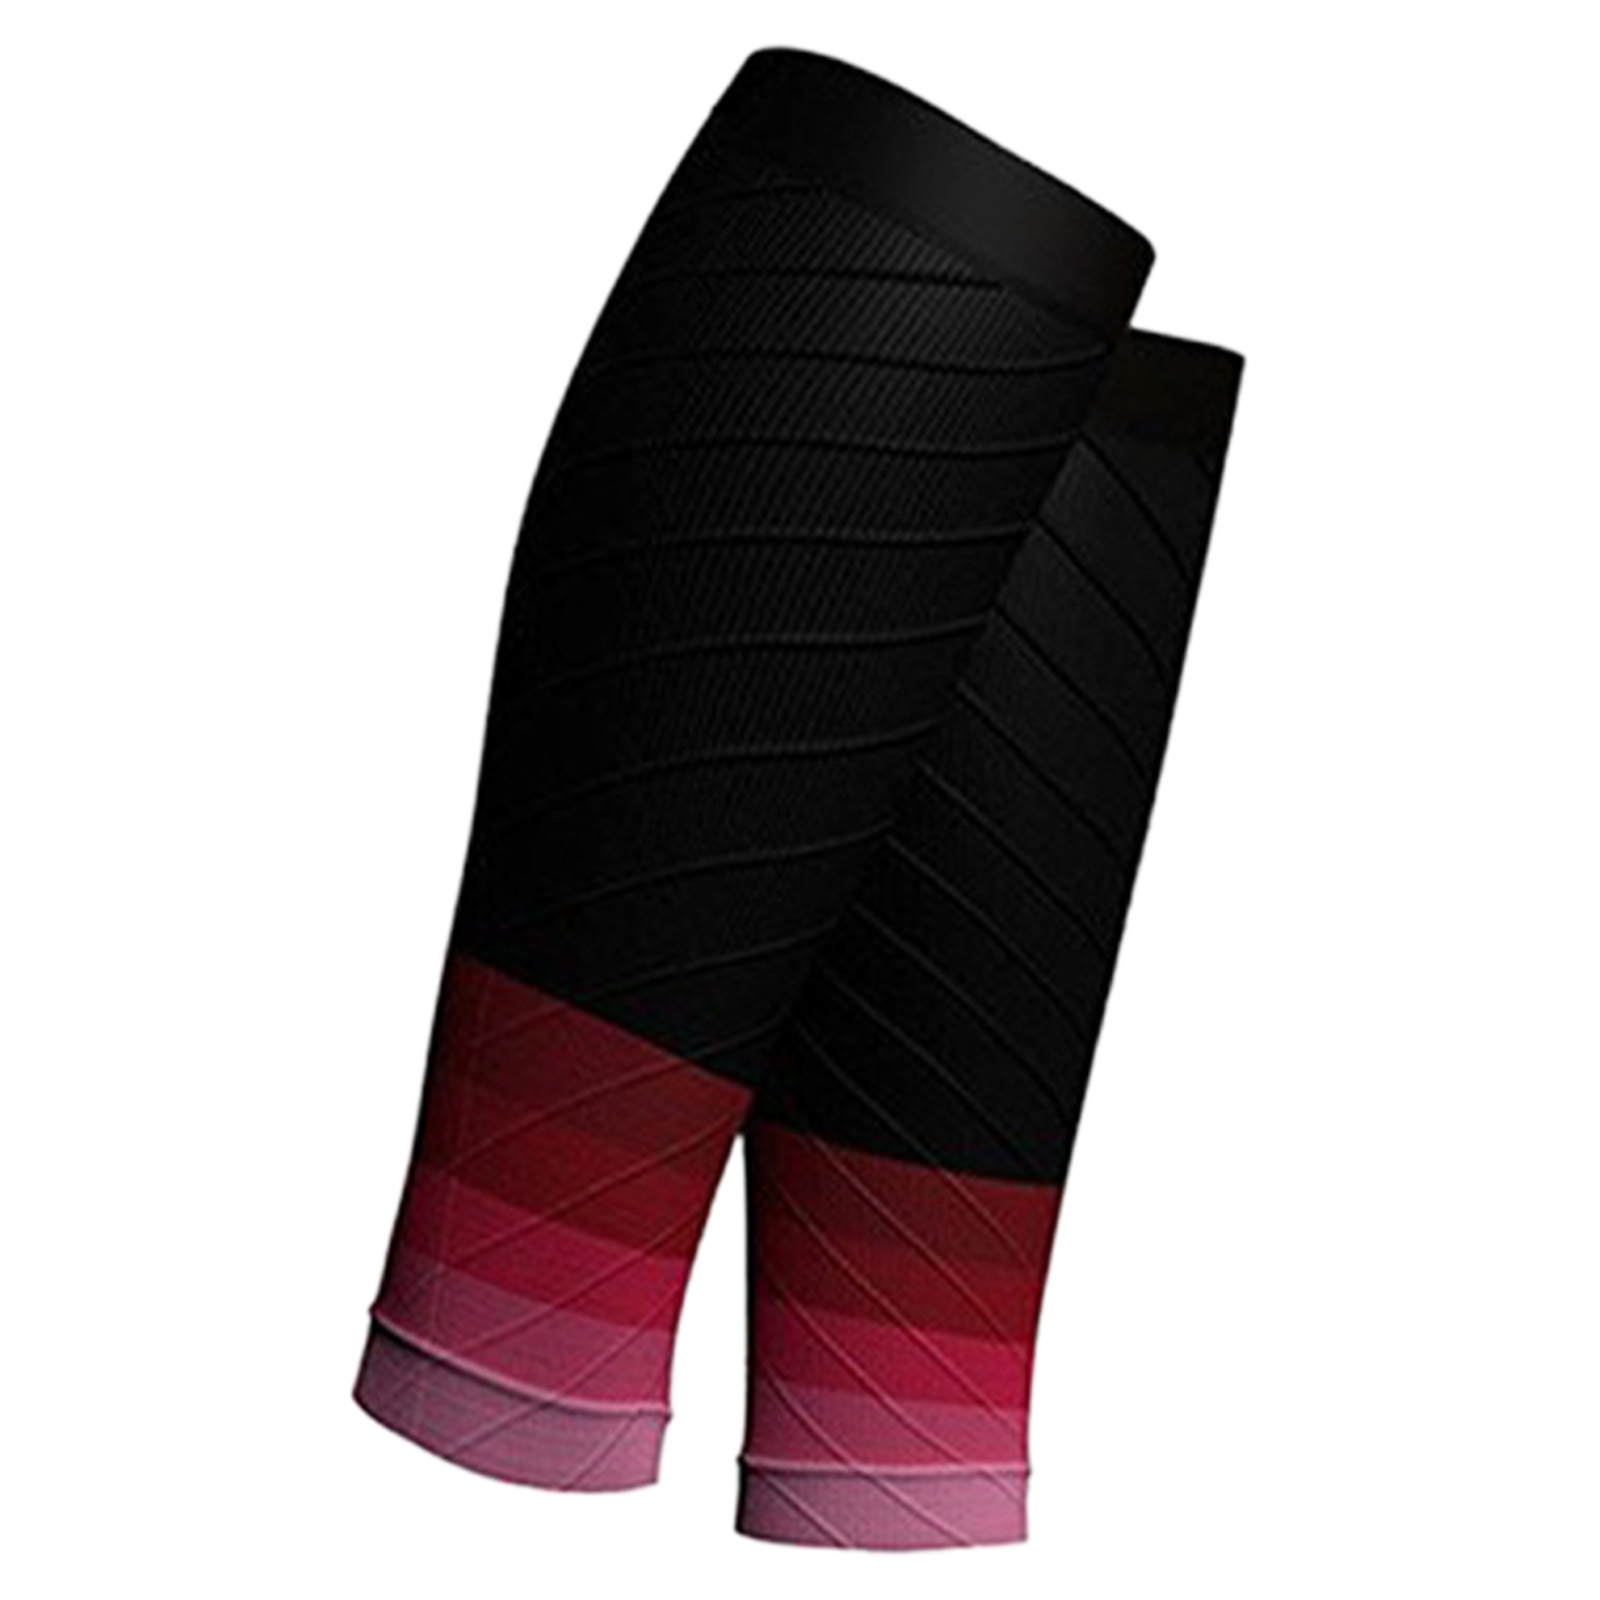 Calf Compression Sleeves Running Support Recovery Improve Blood Circulation For Shin Splint Men Women